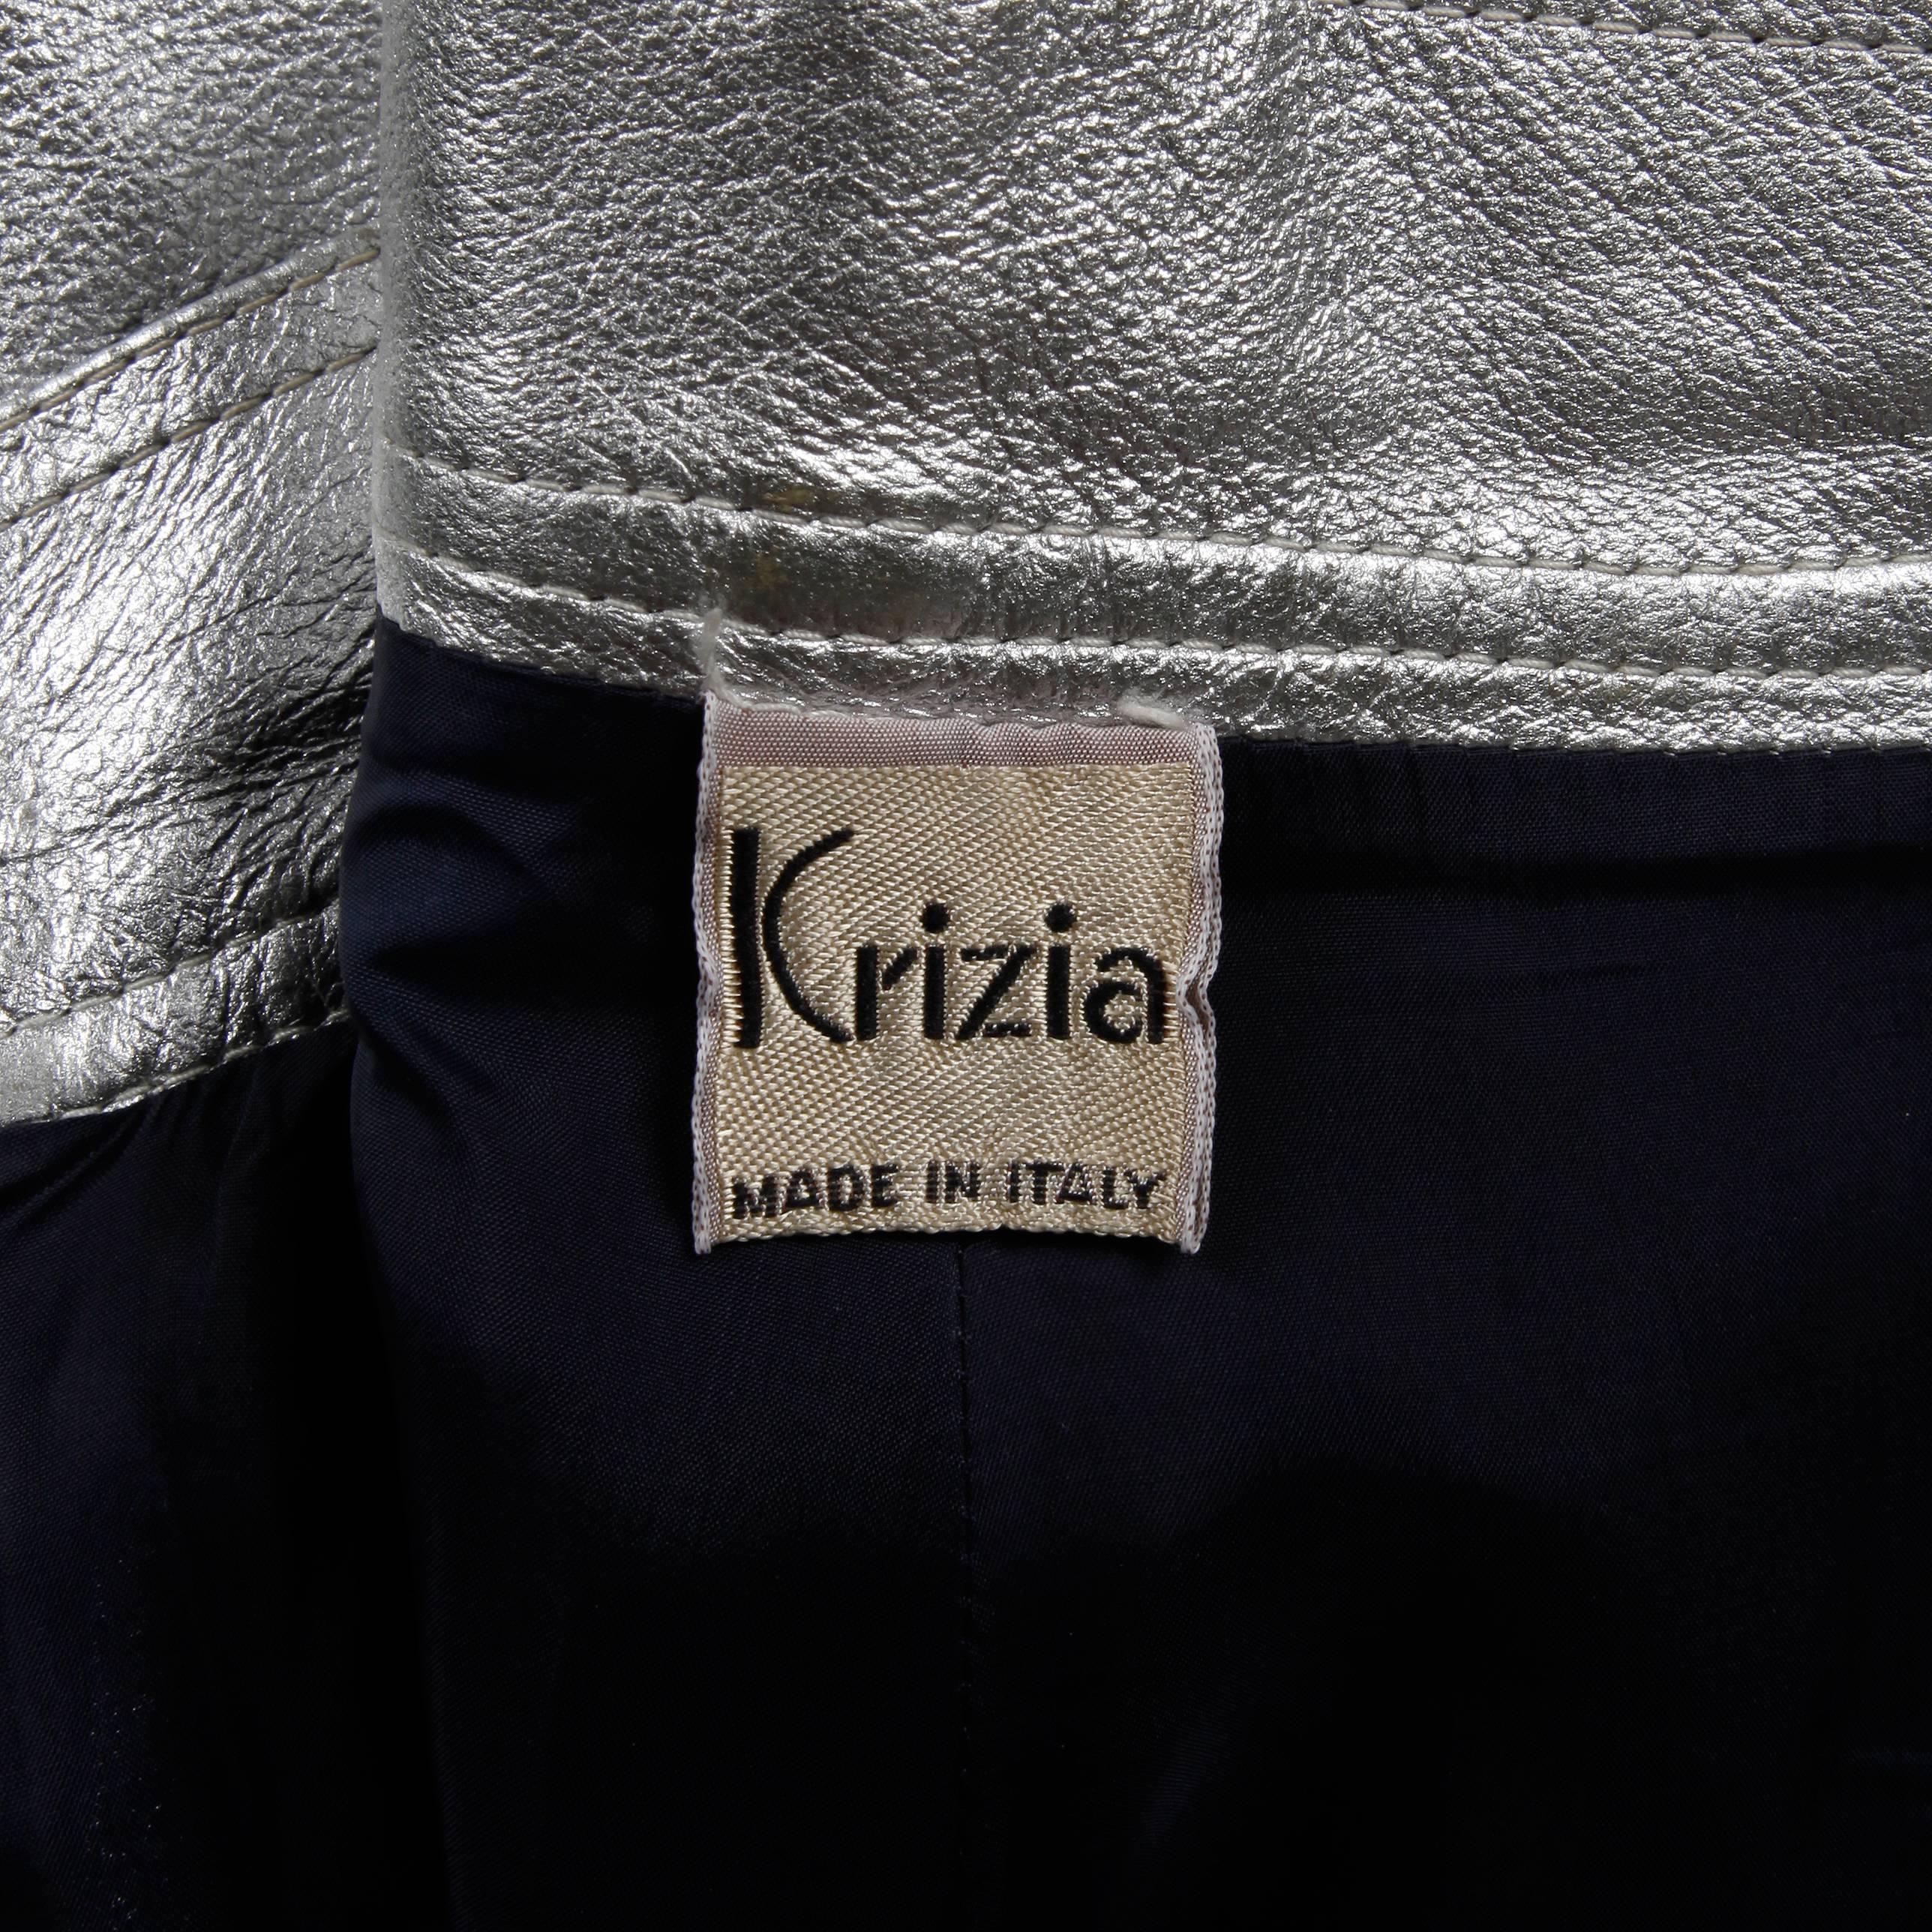 Vintage metallic silver genuine leather shorts by Krizia. Fully lined with front metal zip, button and belt closure. Side patch pockets and attached belt. Fits like a modern size small. The waist measures 25